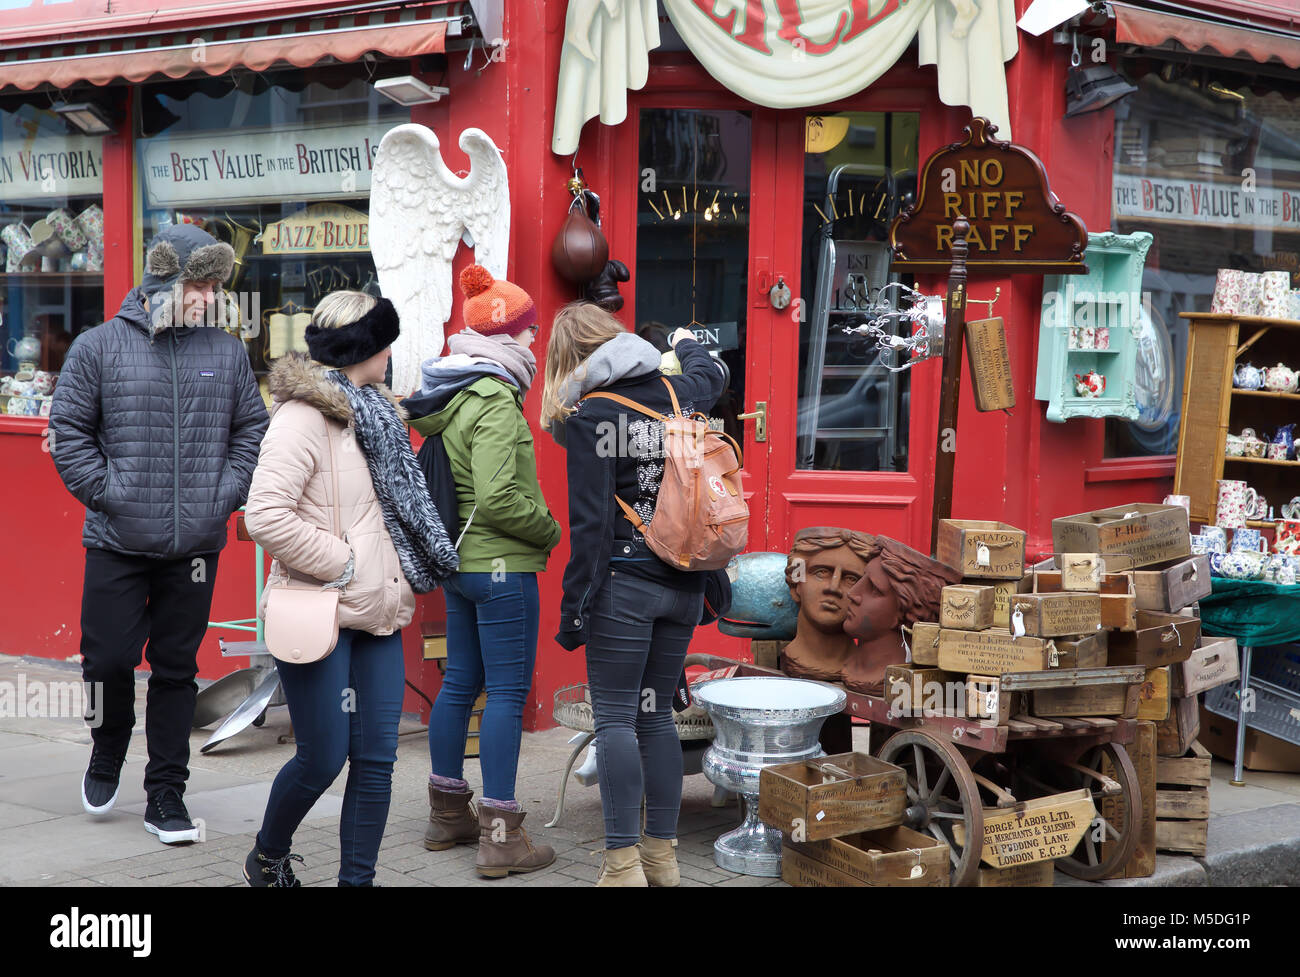 London,UK,22nd February 2018,People view the antiques at the famous Portobello Road Market in London©Keith Larby/Alamy Live News Stock Photo